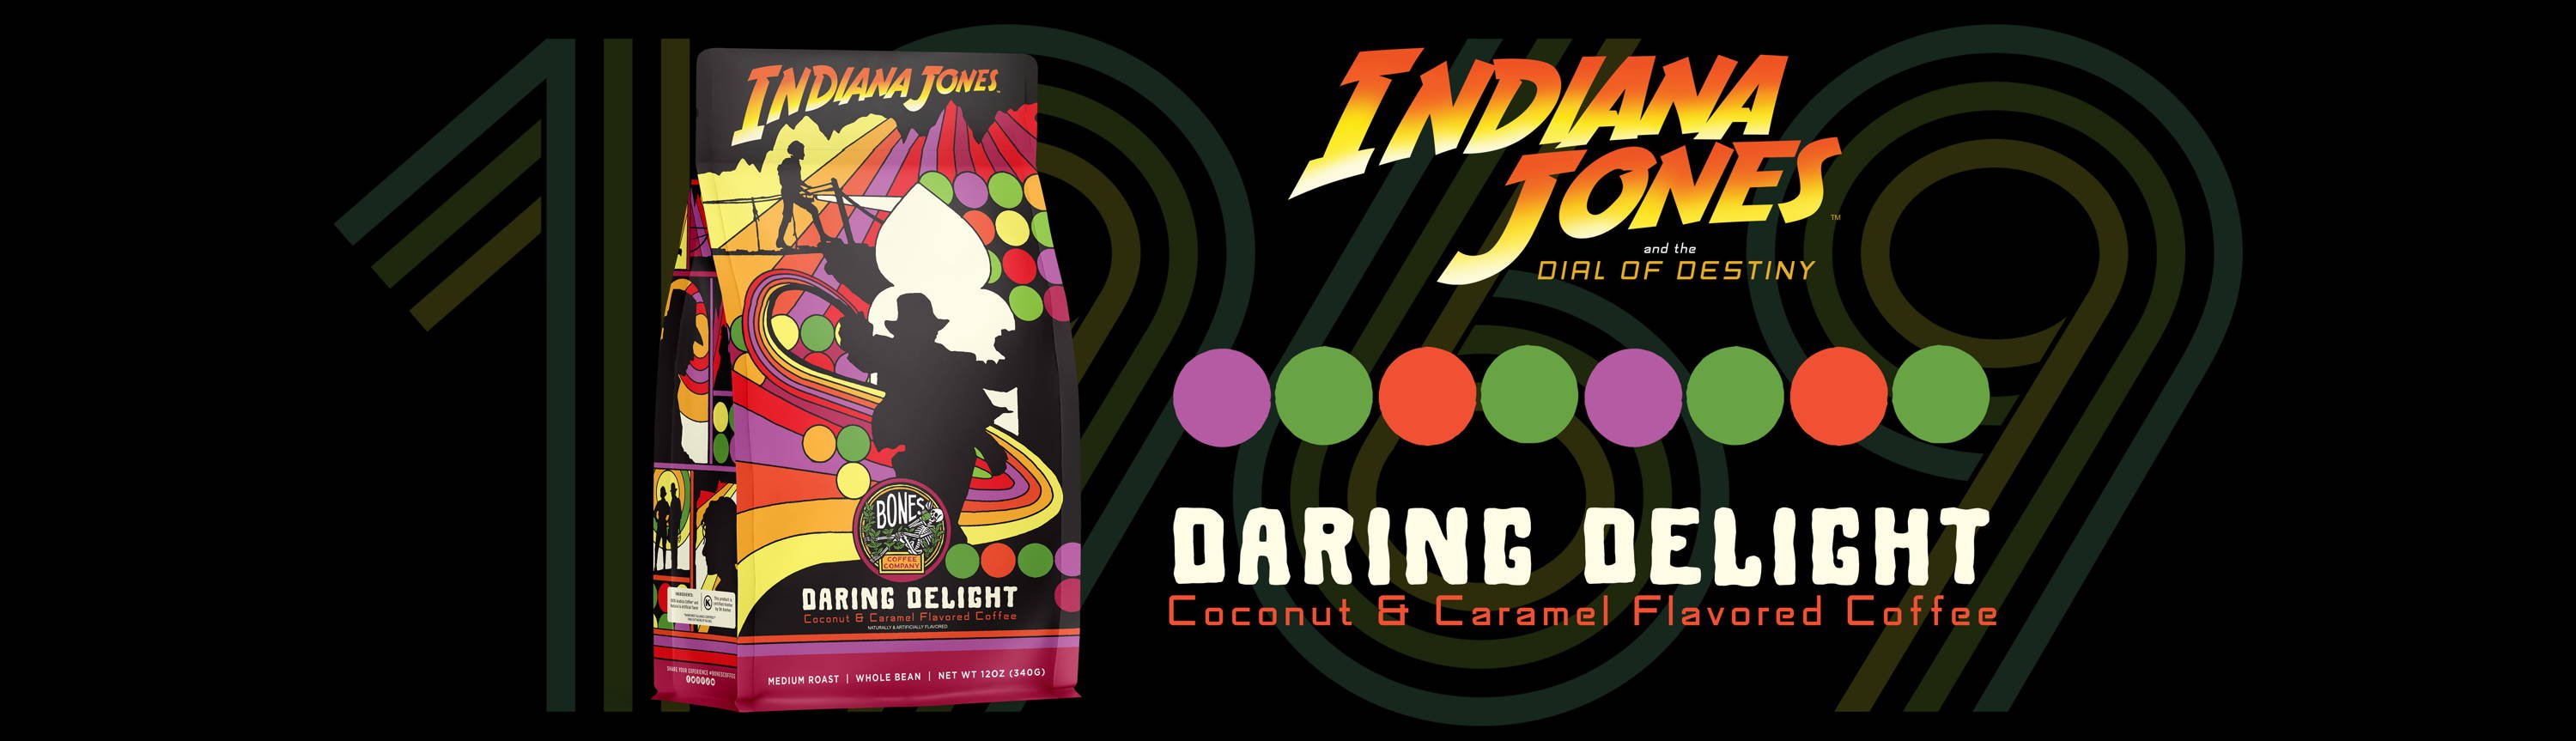 A 12 ounce bag of coffee inspired by Lucasfilm's Indiana Jones and the Dial of Destiny. The coffee is named Daring Delight and it is coconut and caramel flavored, featuring Indiana Jones on the bag.